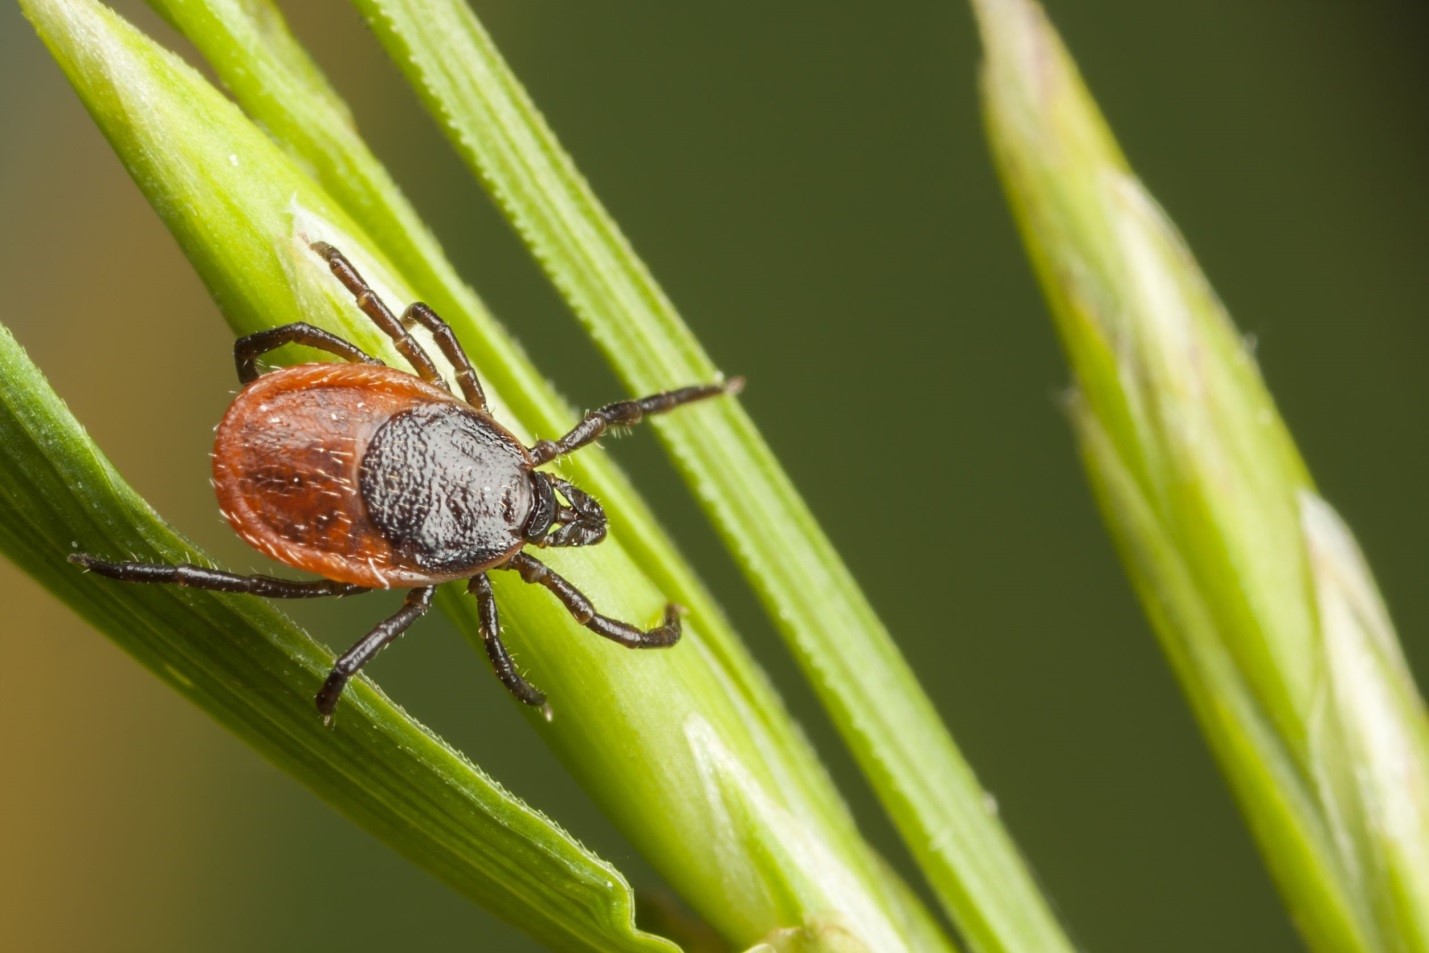 N.L. at Higher Risk of Lyme Disease as Tick Populations Continue to Rise